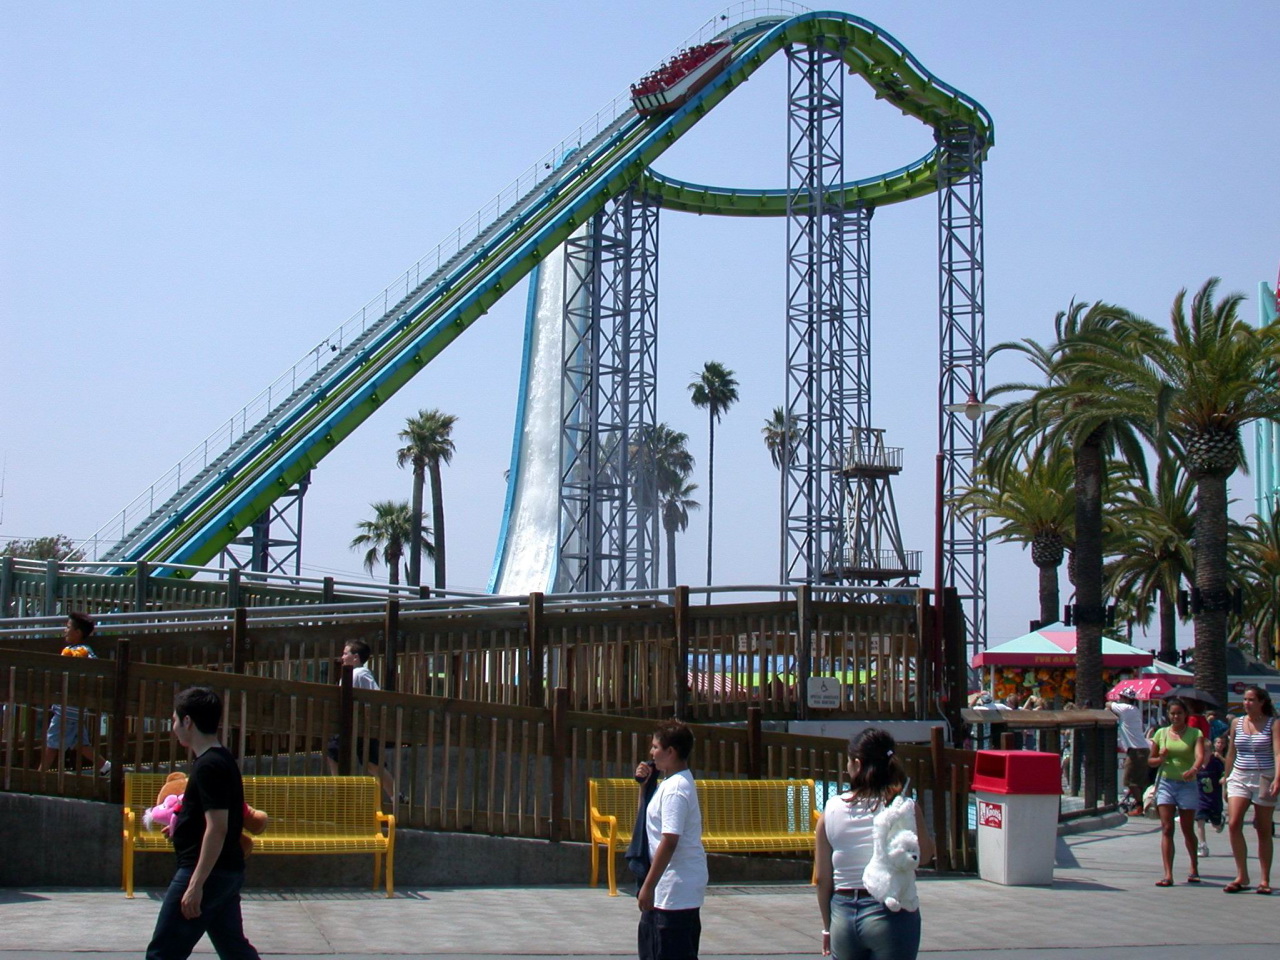 knotts berry farm water rides